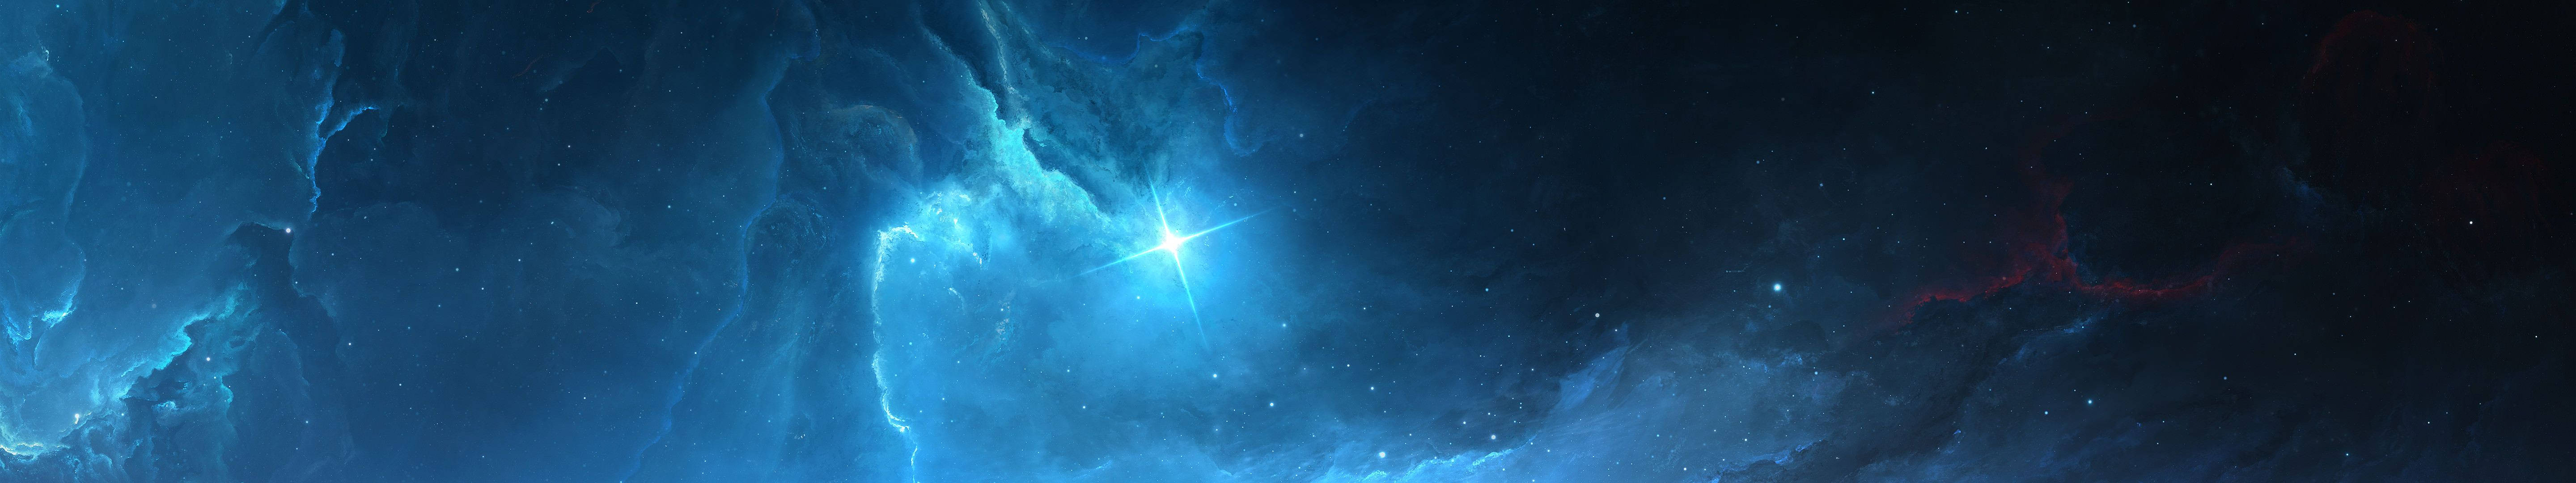 Join a Twinkling Journey Through the Blue Galaxy Wallpaper